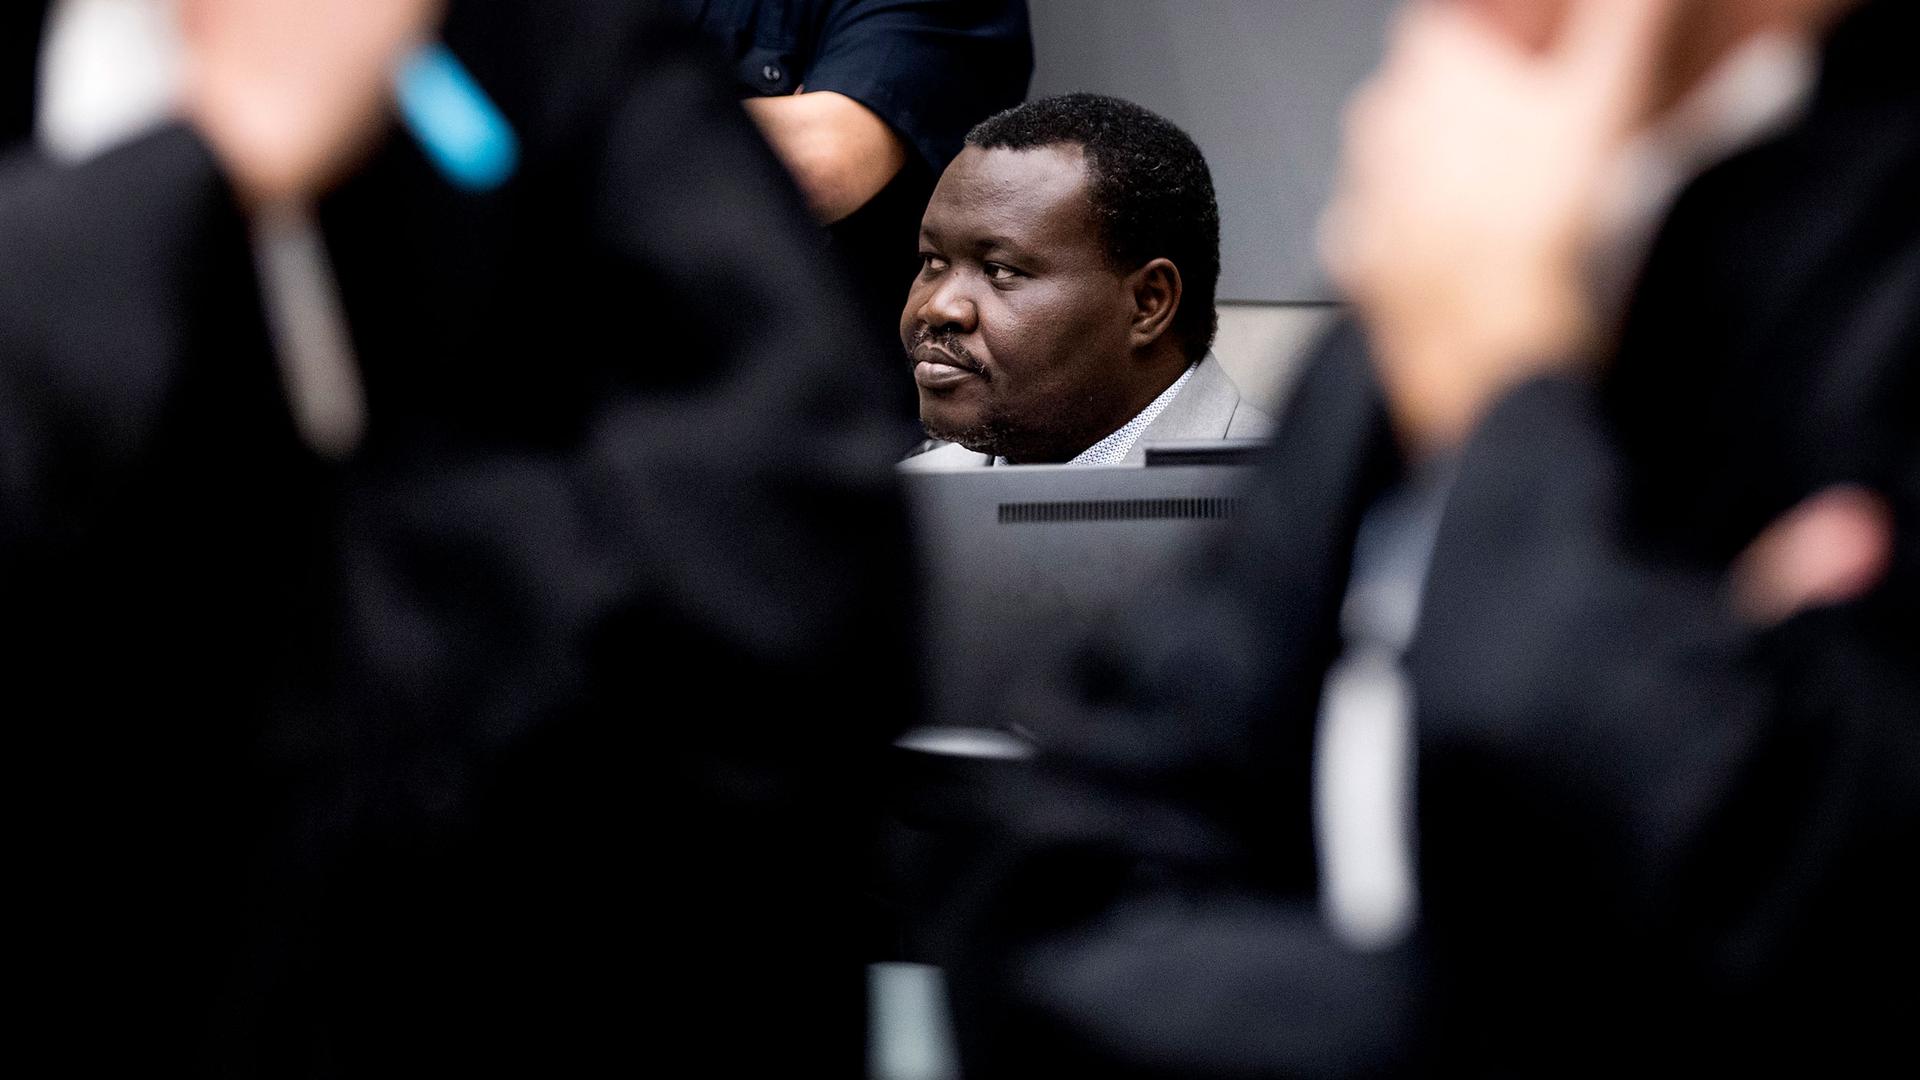 Patrice-Edouard Ngaïssona is seen only from the head up, blocked mostly by ICC judges standing in the nearground.